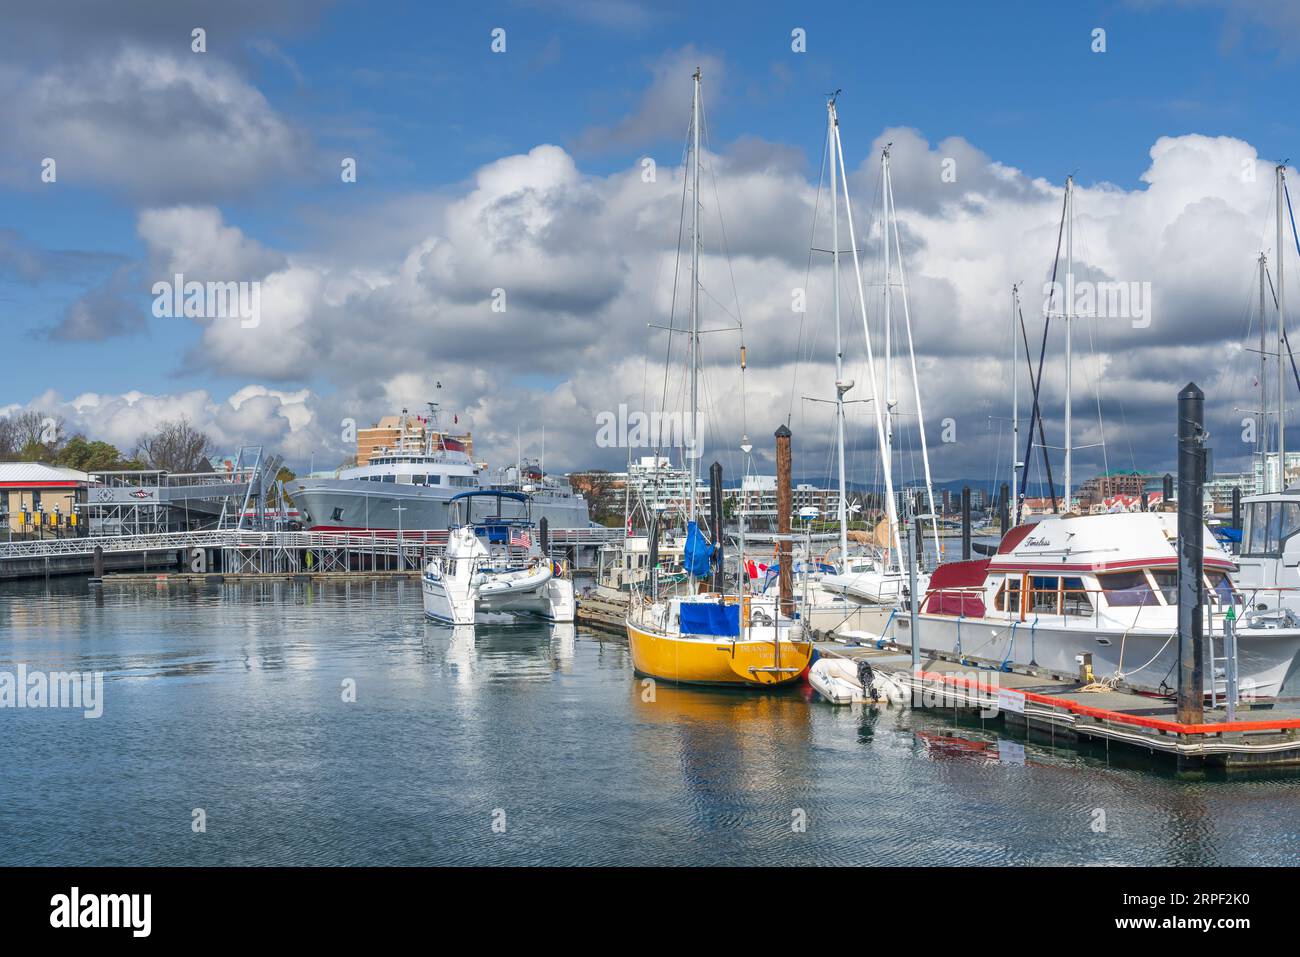 The  marina with boats in the inner harbor  of Victoria, Vancouver Island, British Columbia, Canada. Stock Photo